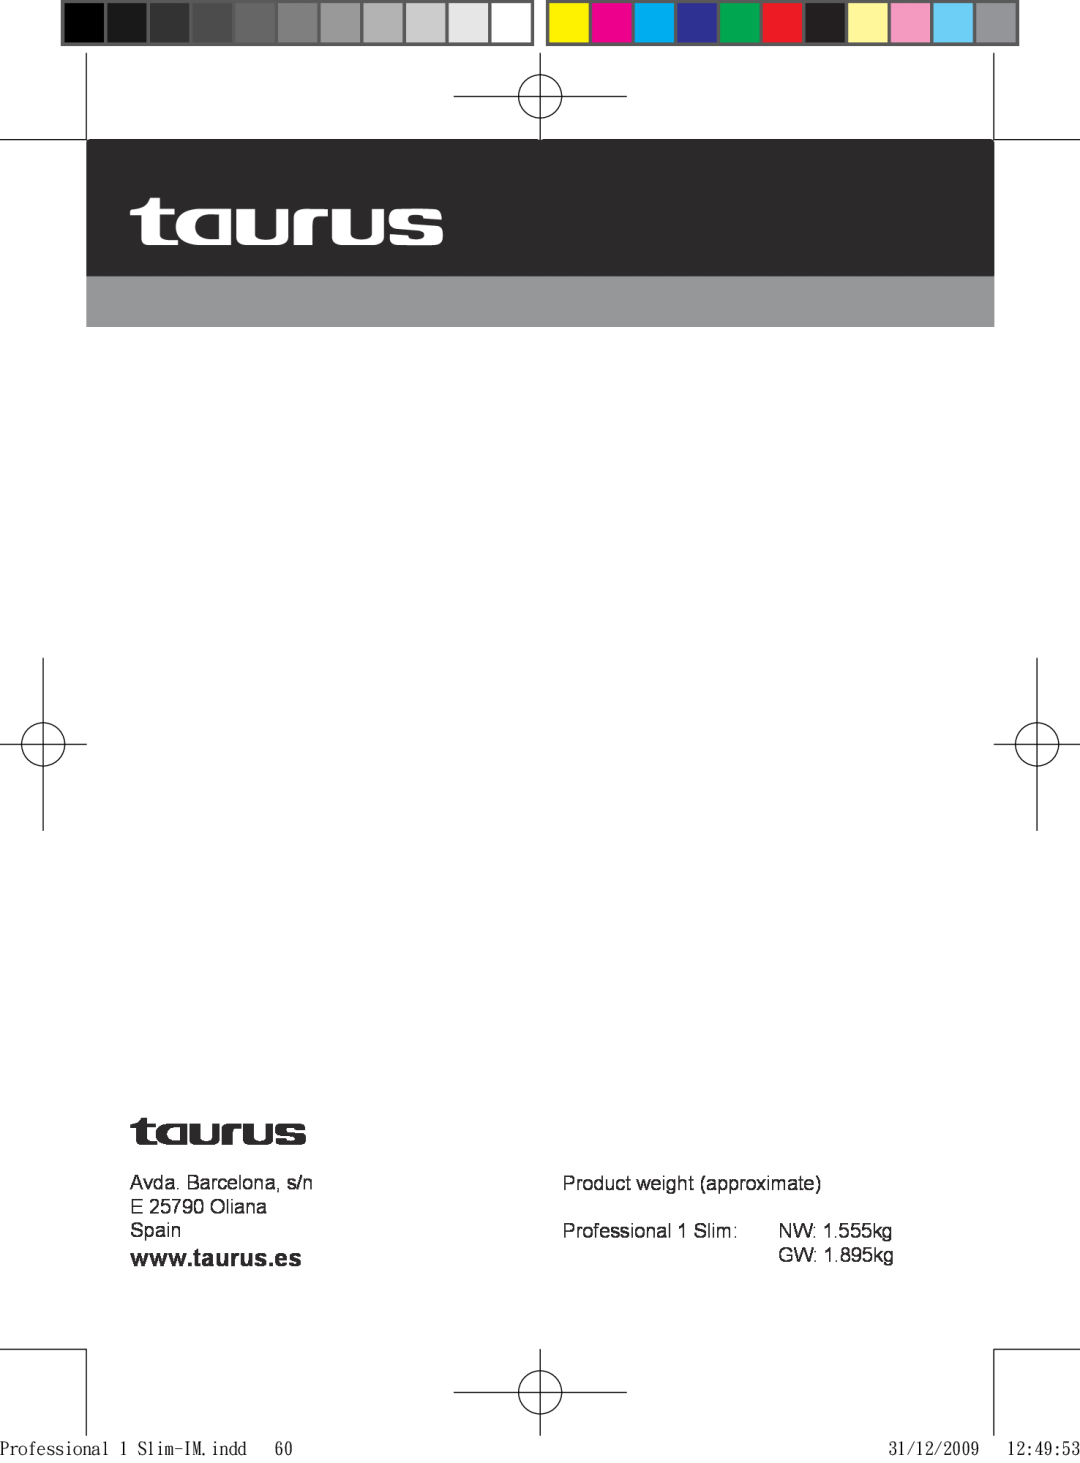 Taurus Group Product weight approximate, E 25790 Oliana, Spain, Professional 1 Slim, NW 1.555kg, GW 1.895kg, 31/12/2009 